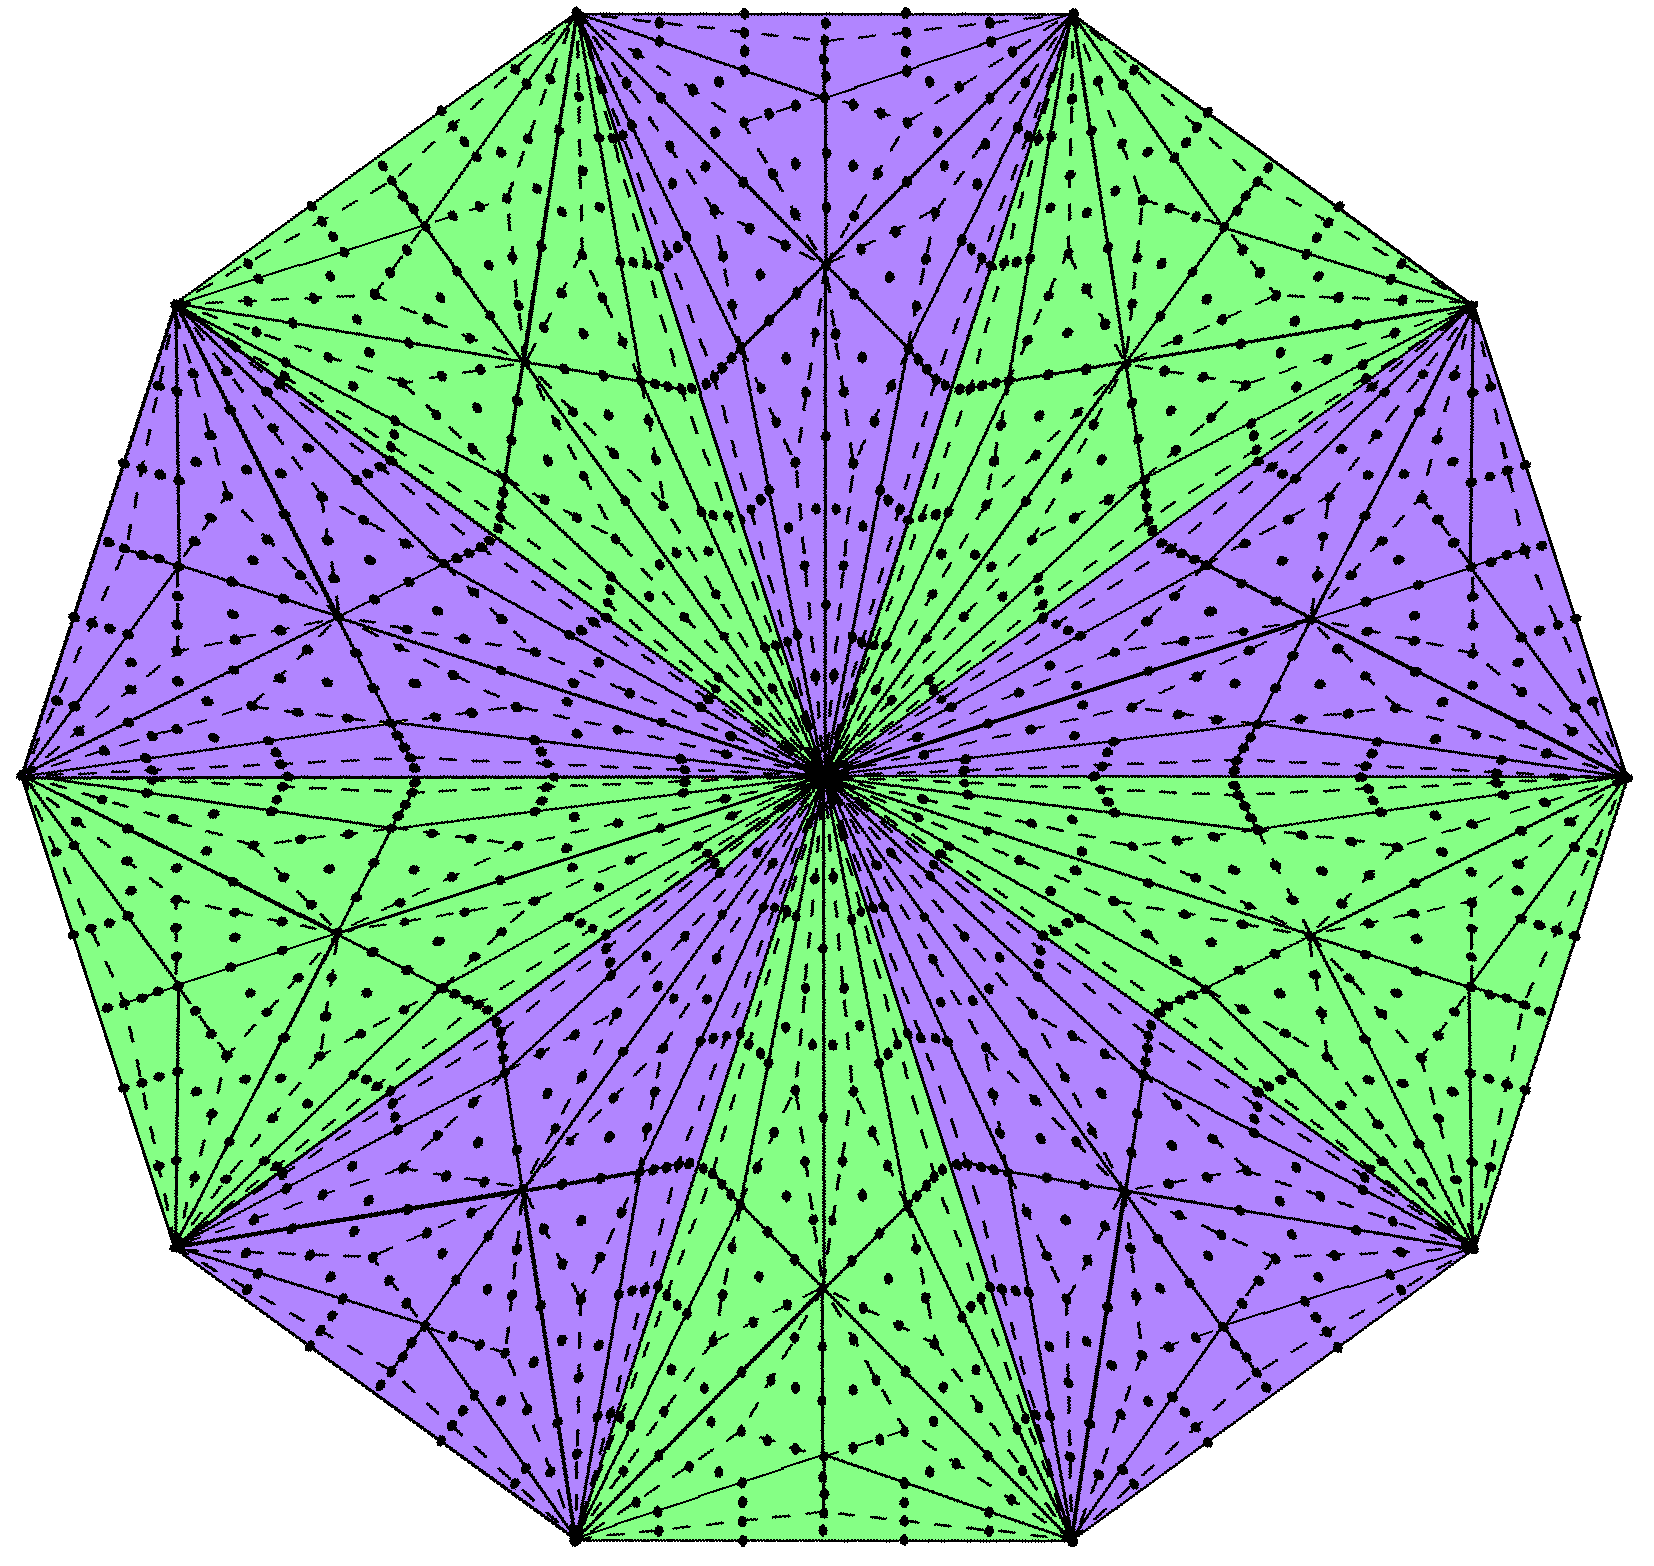 1230 yods surround centre of Type D decagon